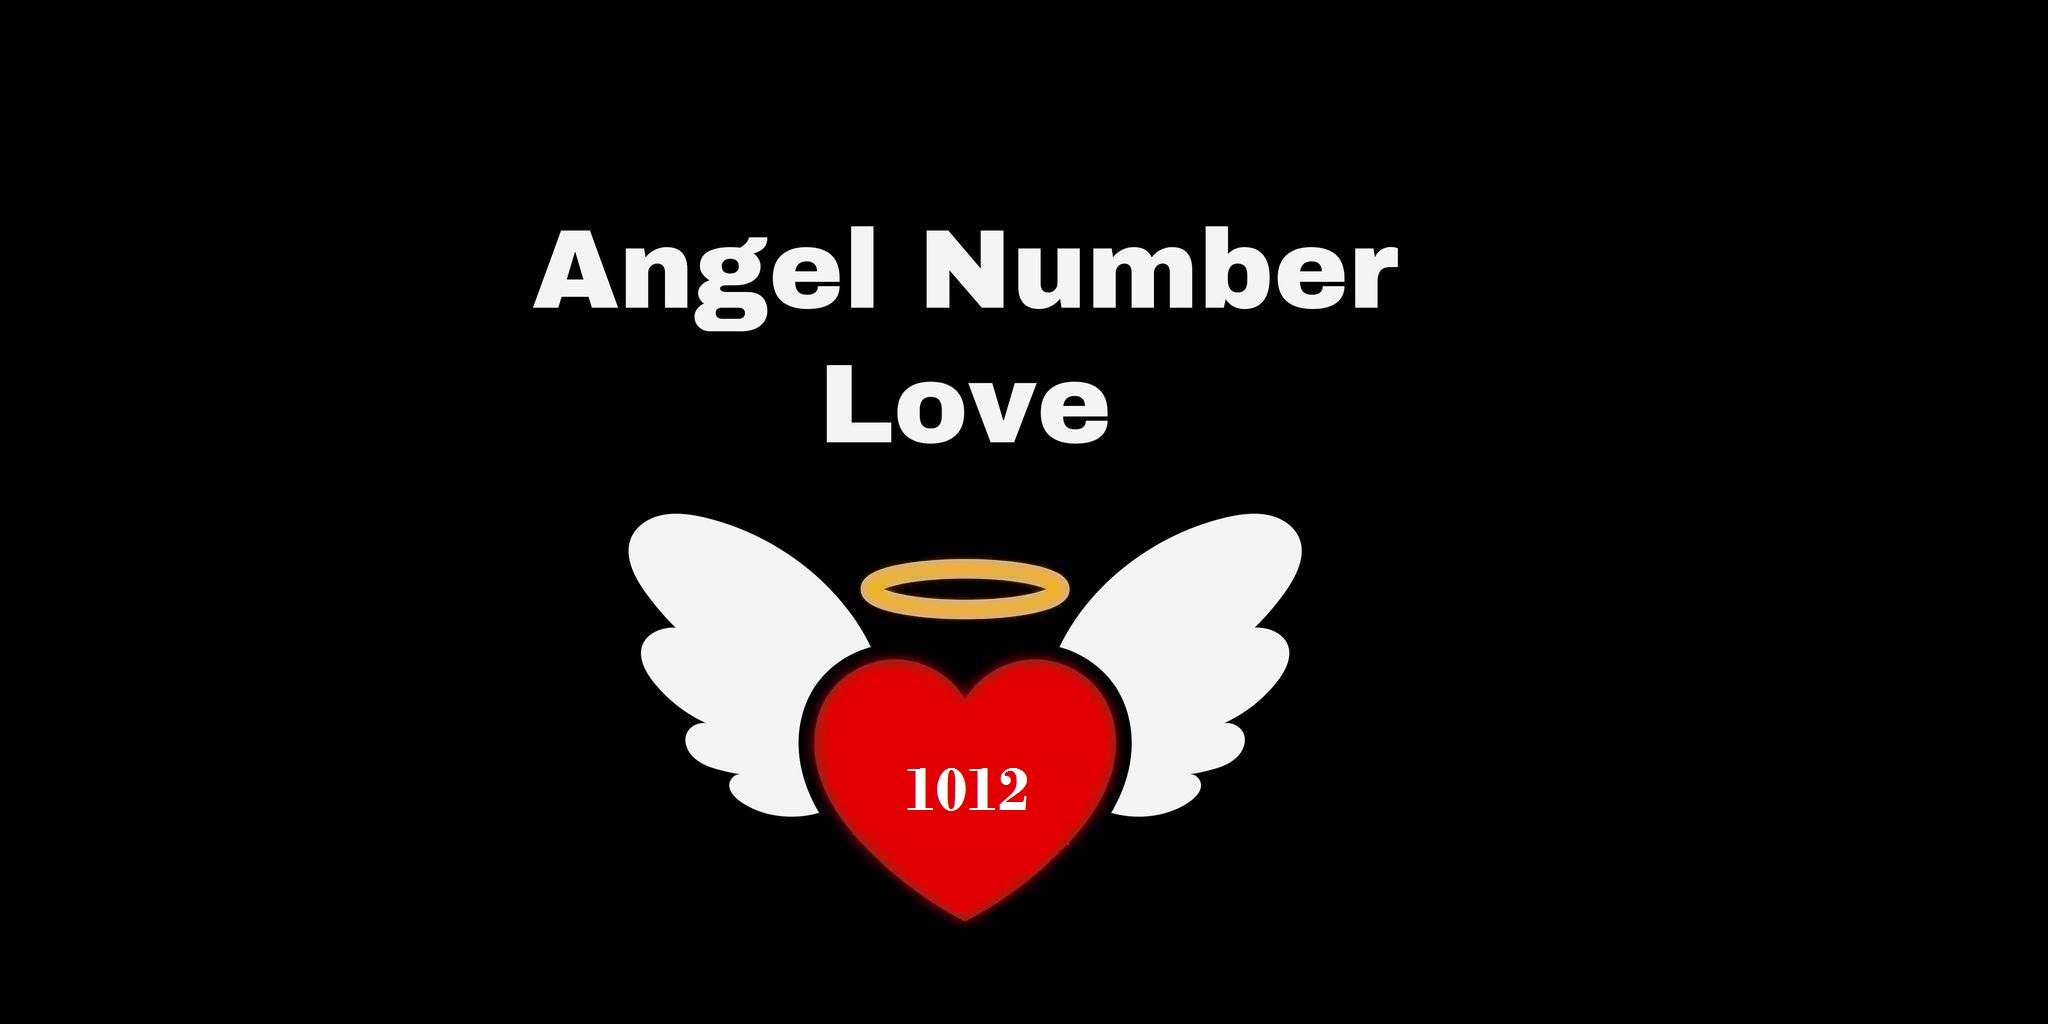 1012 Angel Number Meaning In Love